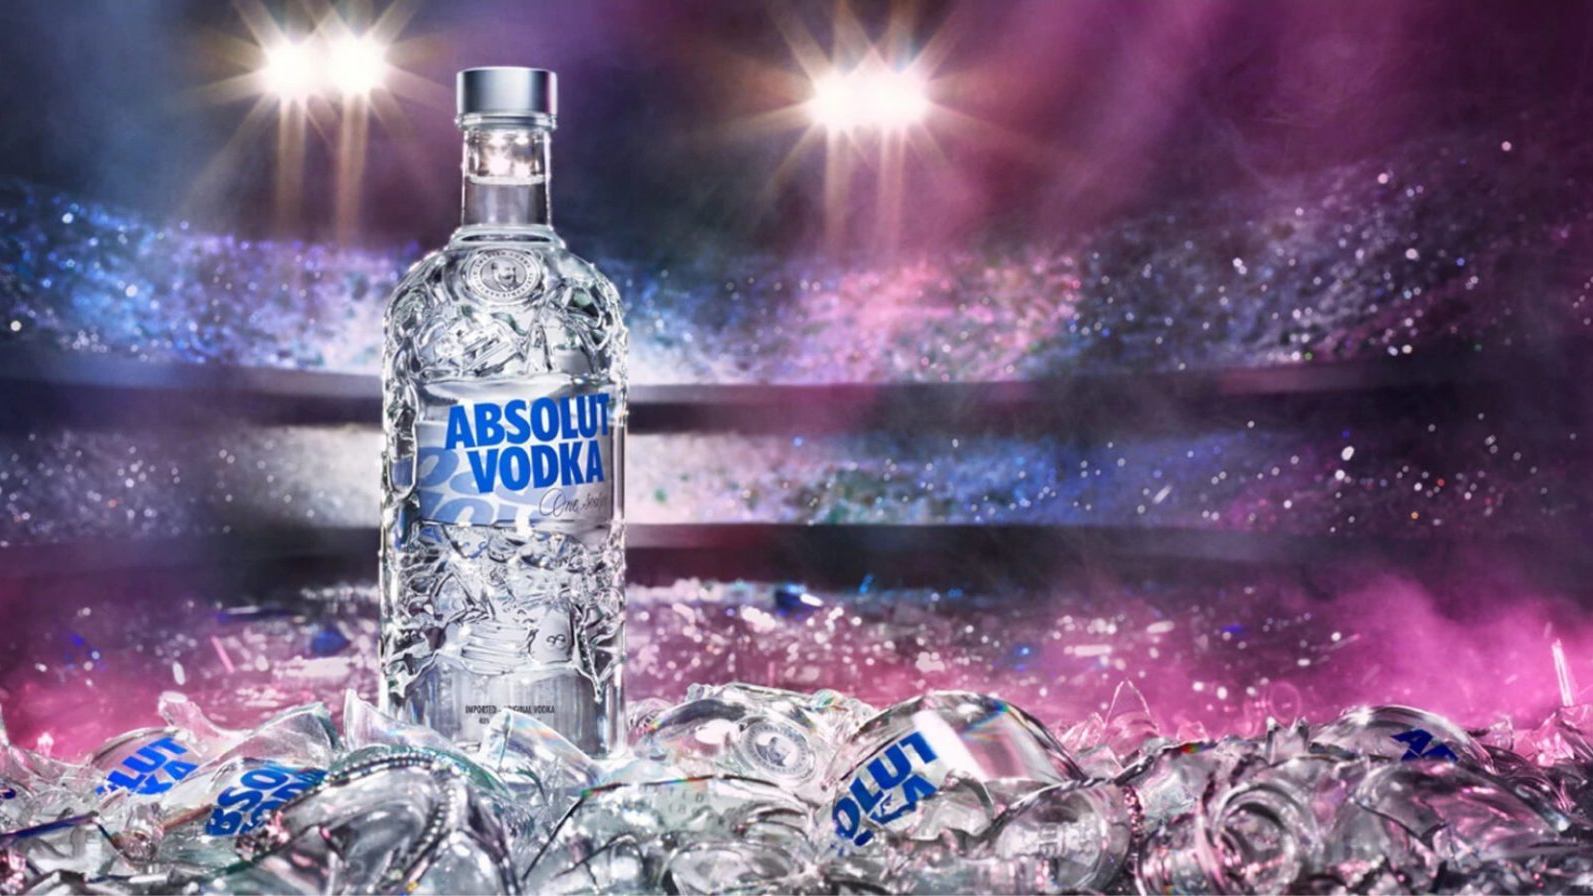 absolut-vodka-unveils-limited-edition-absolut-comeback-bottle-to